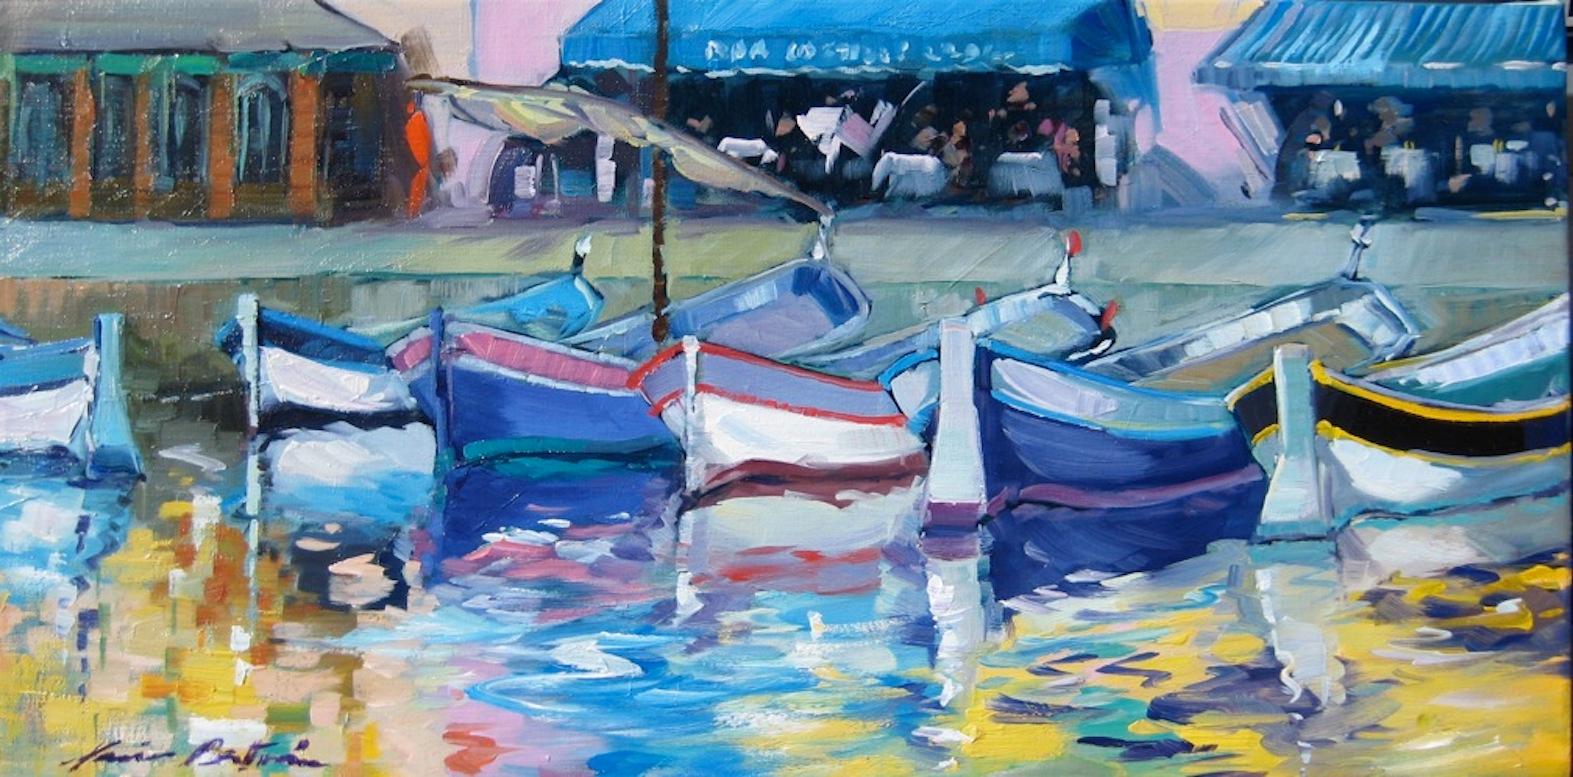 Maria Bertrán Landscape Painting - "Quayside Sanary" Impressionist Oil Of French Riviera by Maria Bertran